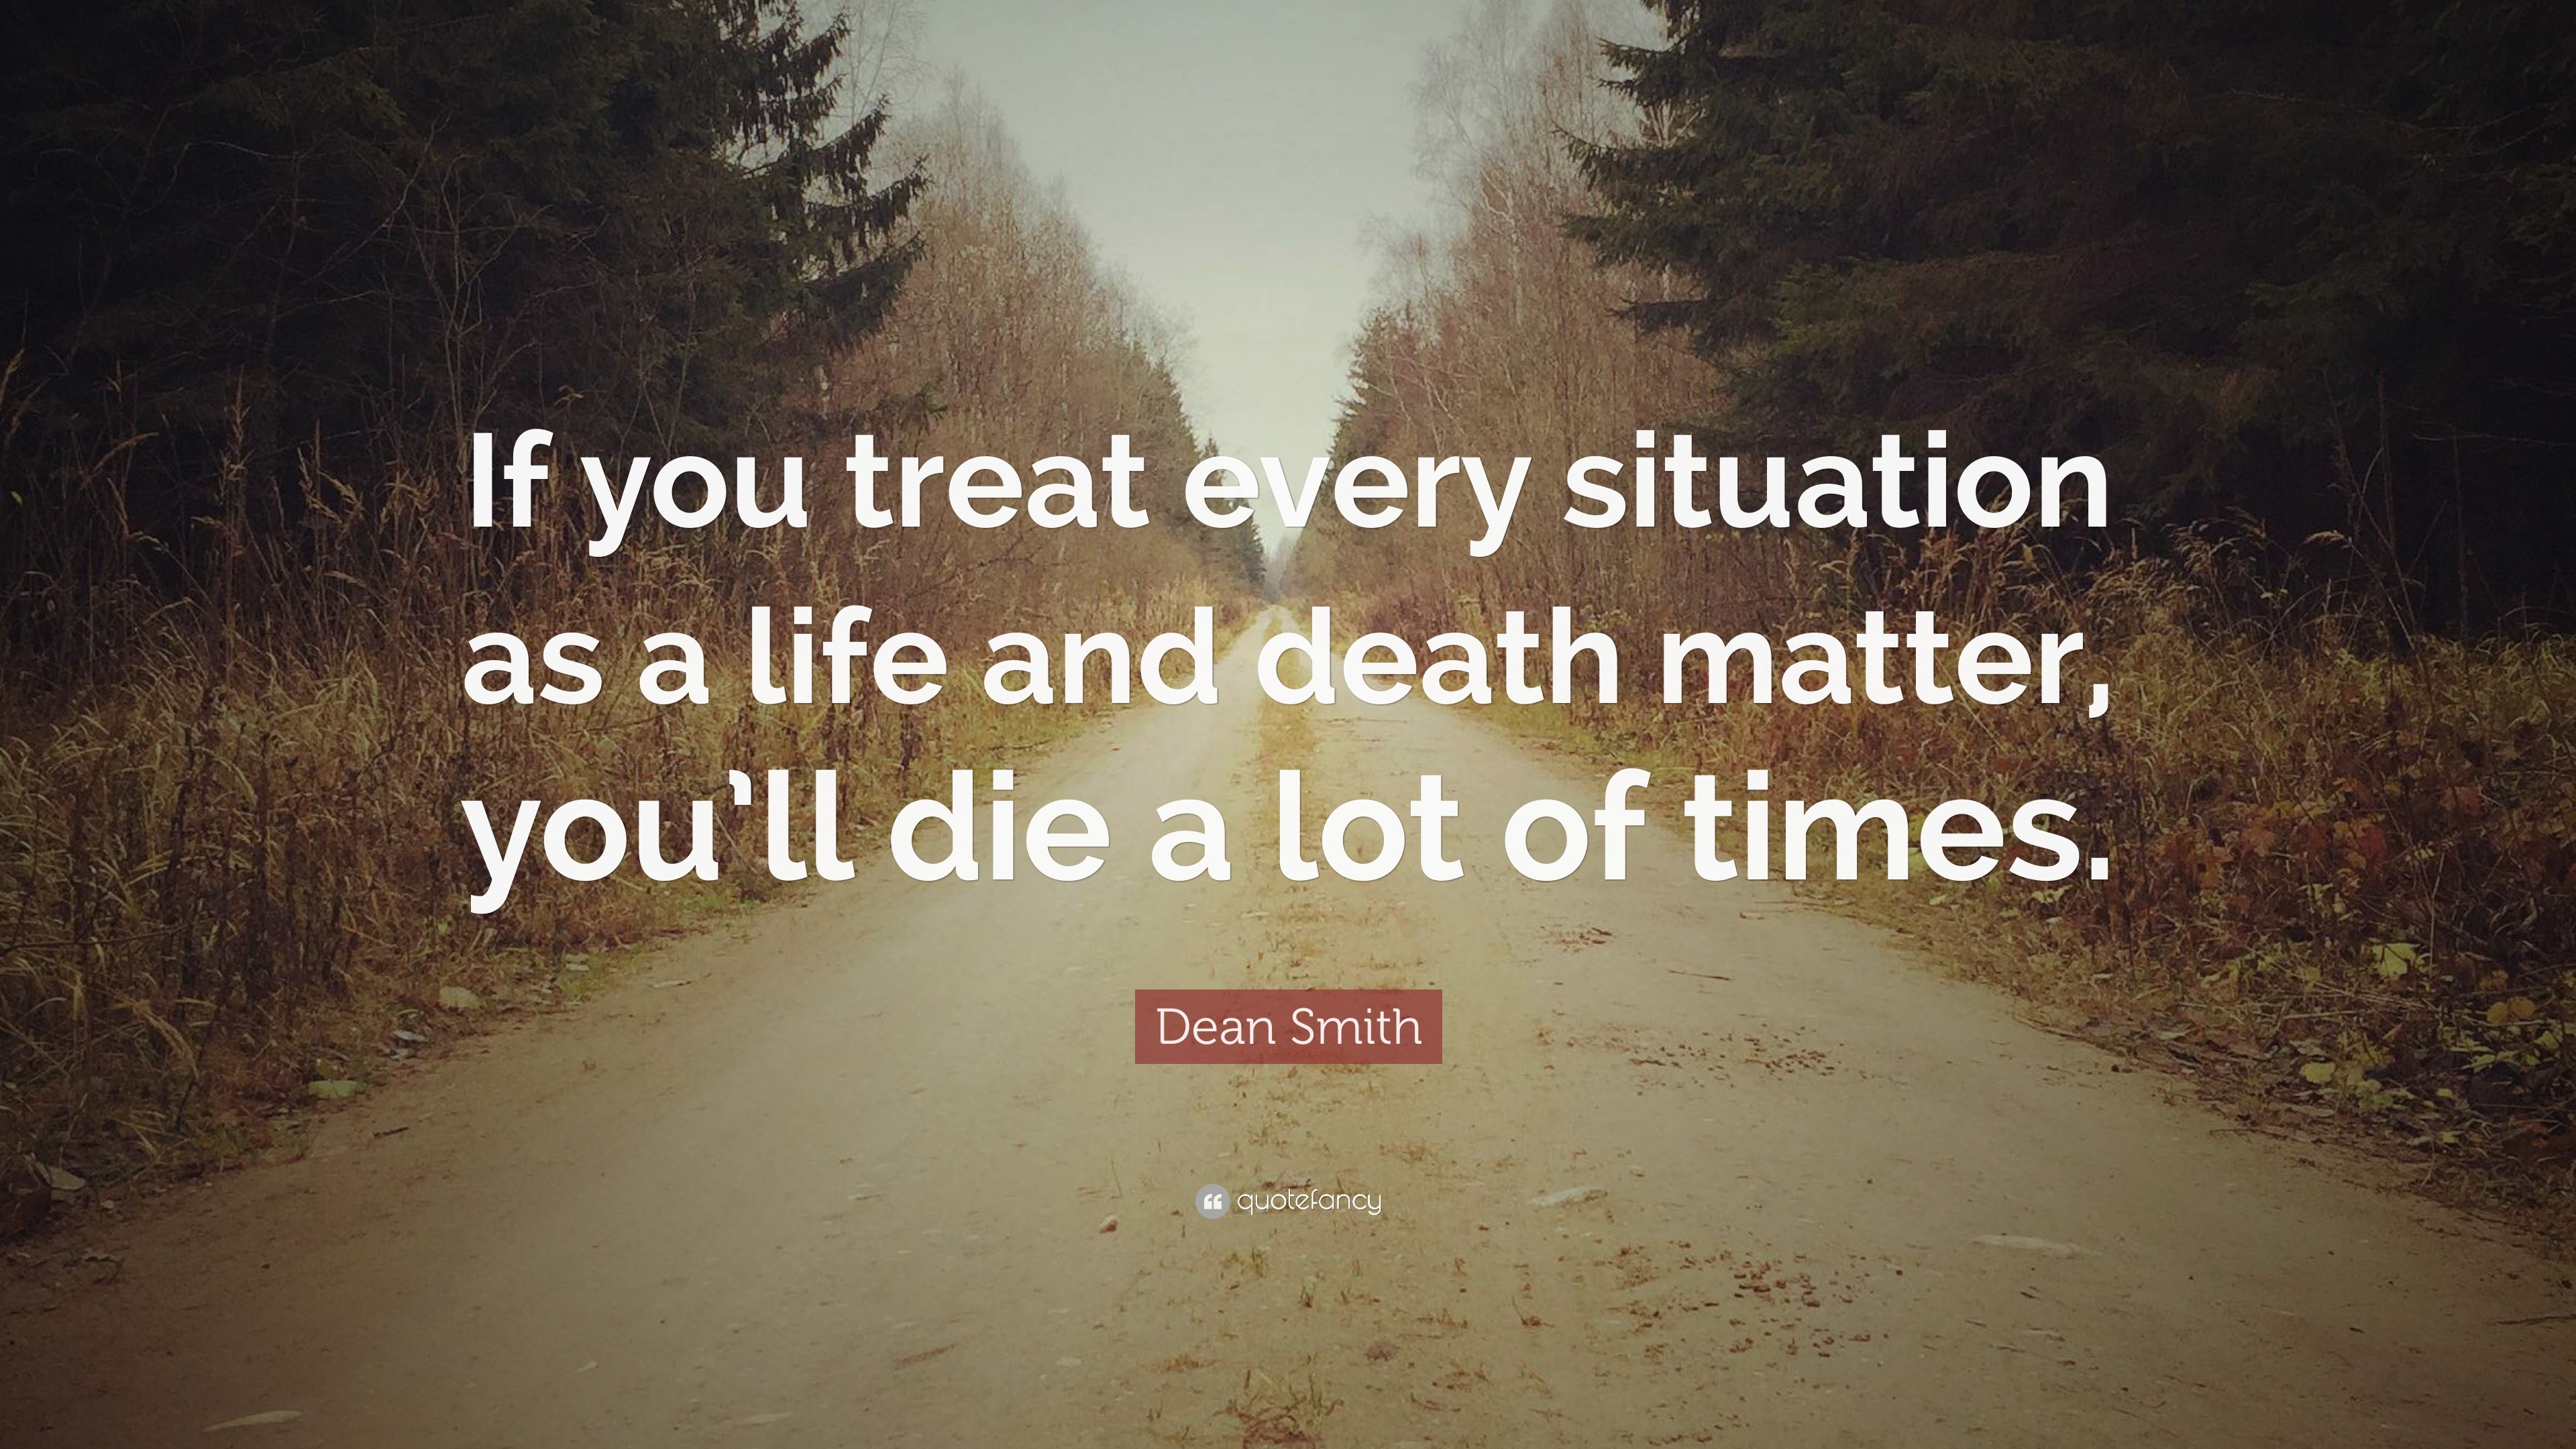 Dean Smith Quote “If you treat every situation as a life